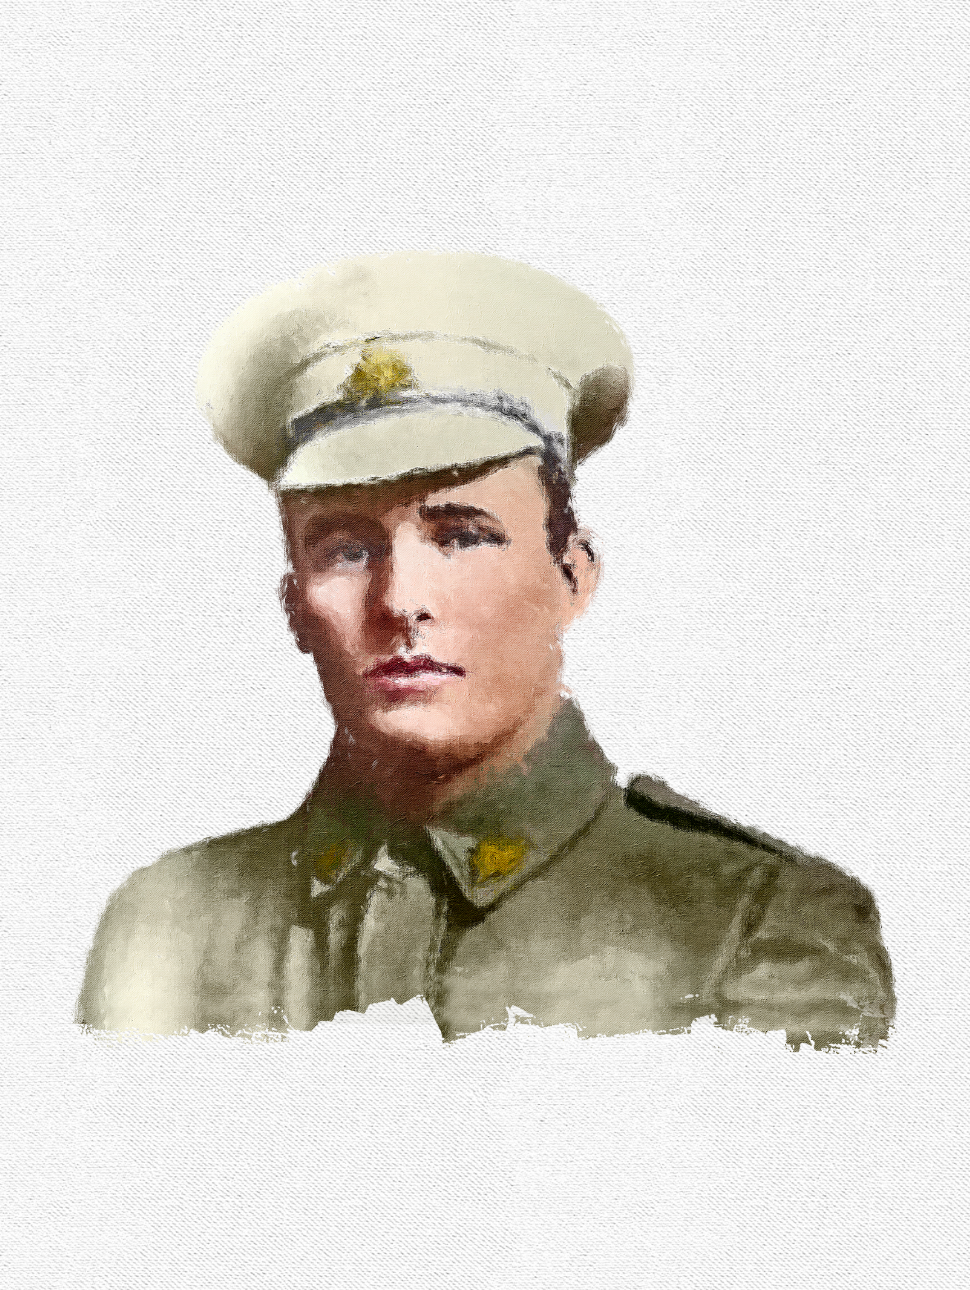 Watercolour artwork of a soldier created for the WA Stories, Hope and Hardship Concert